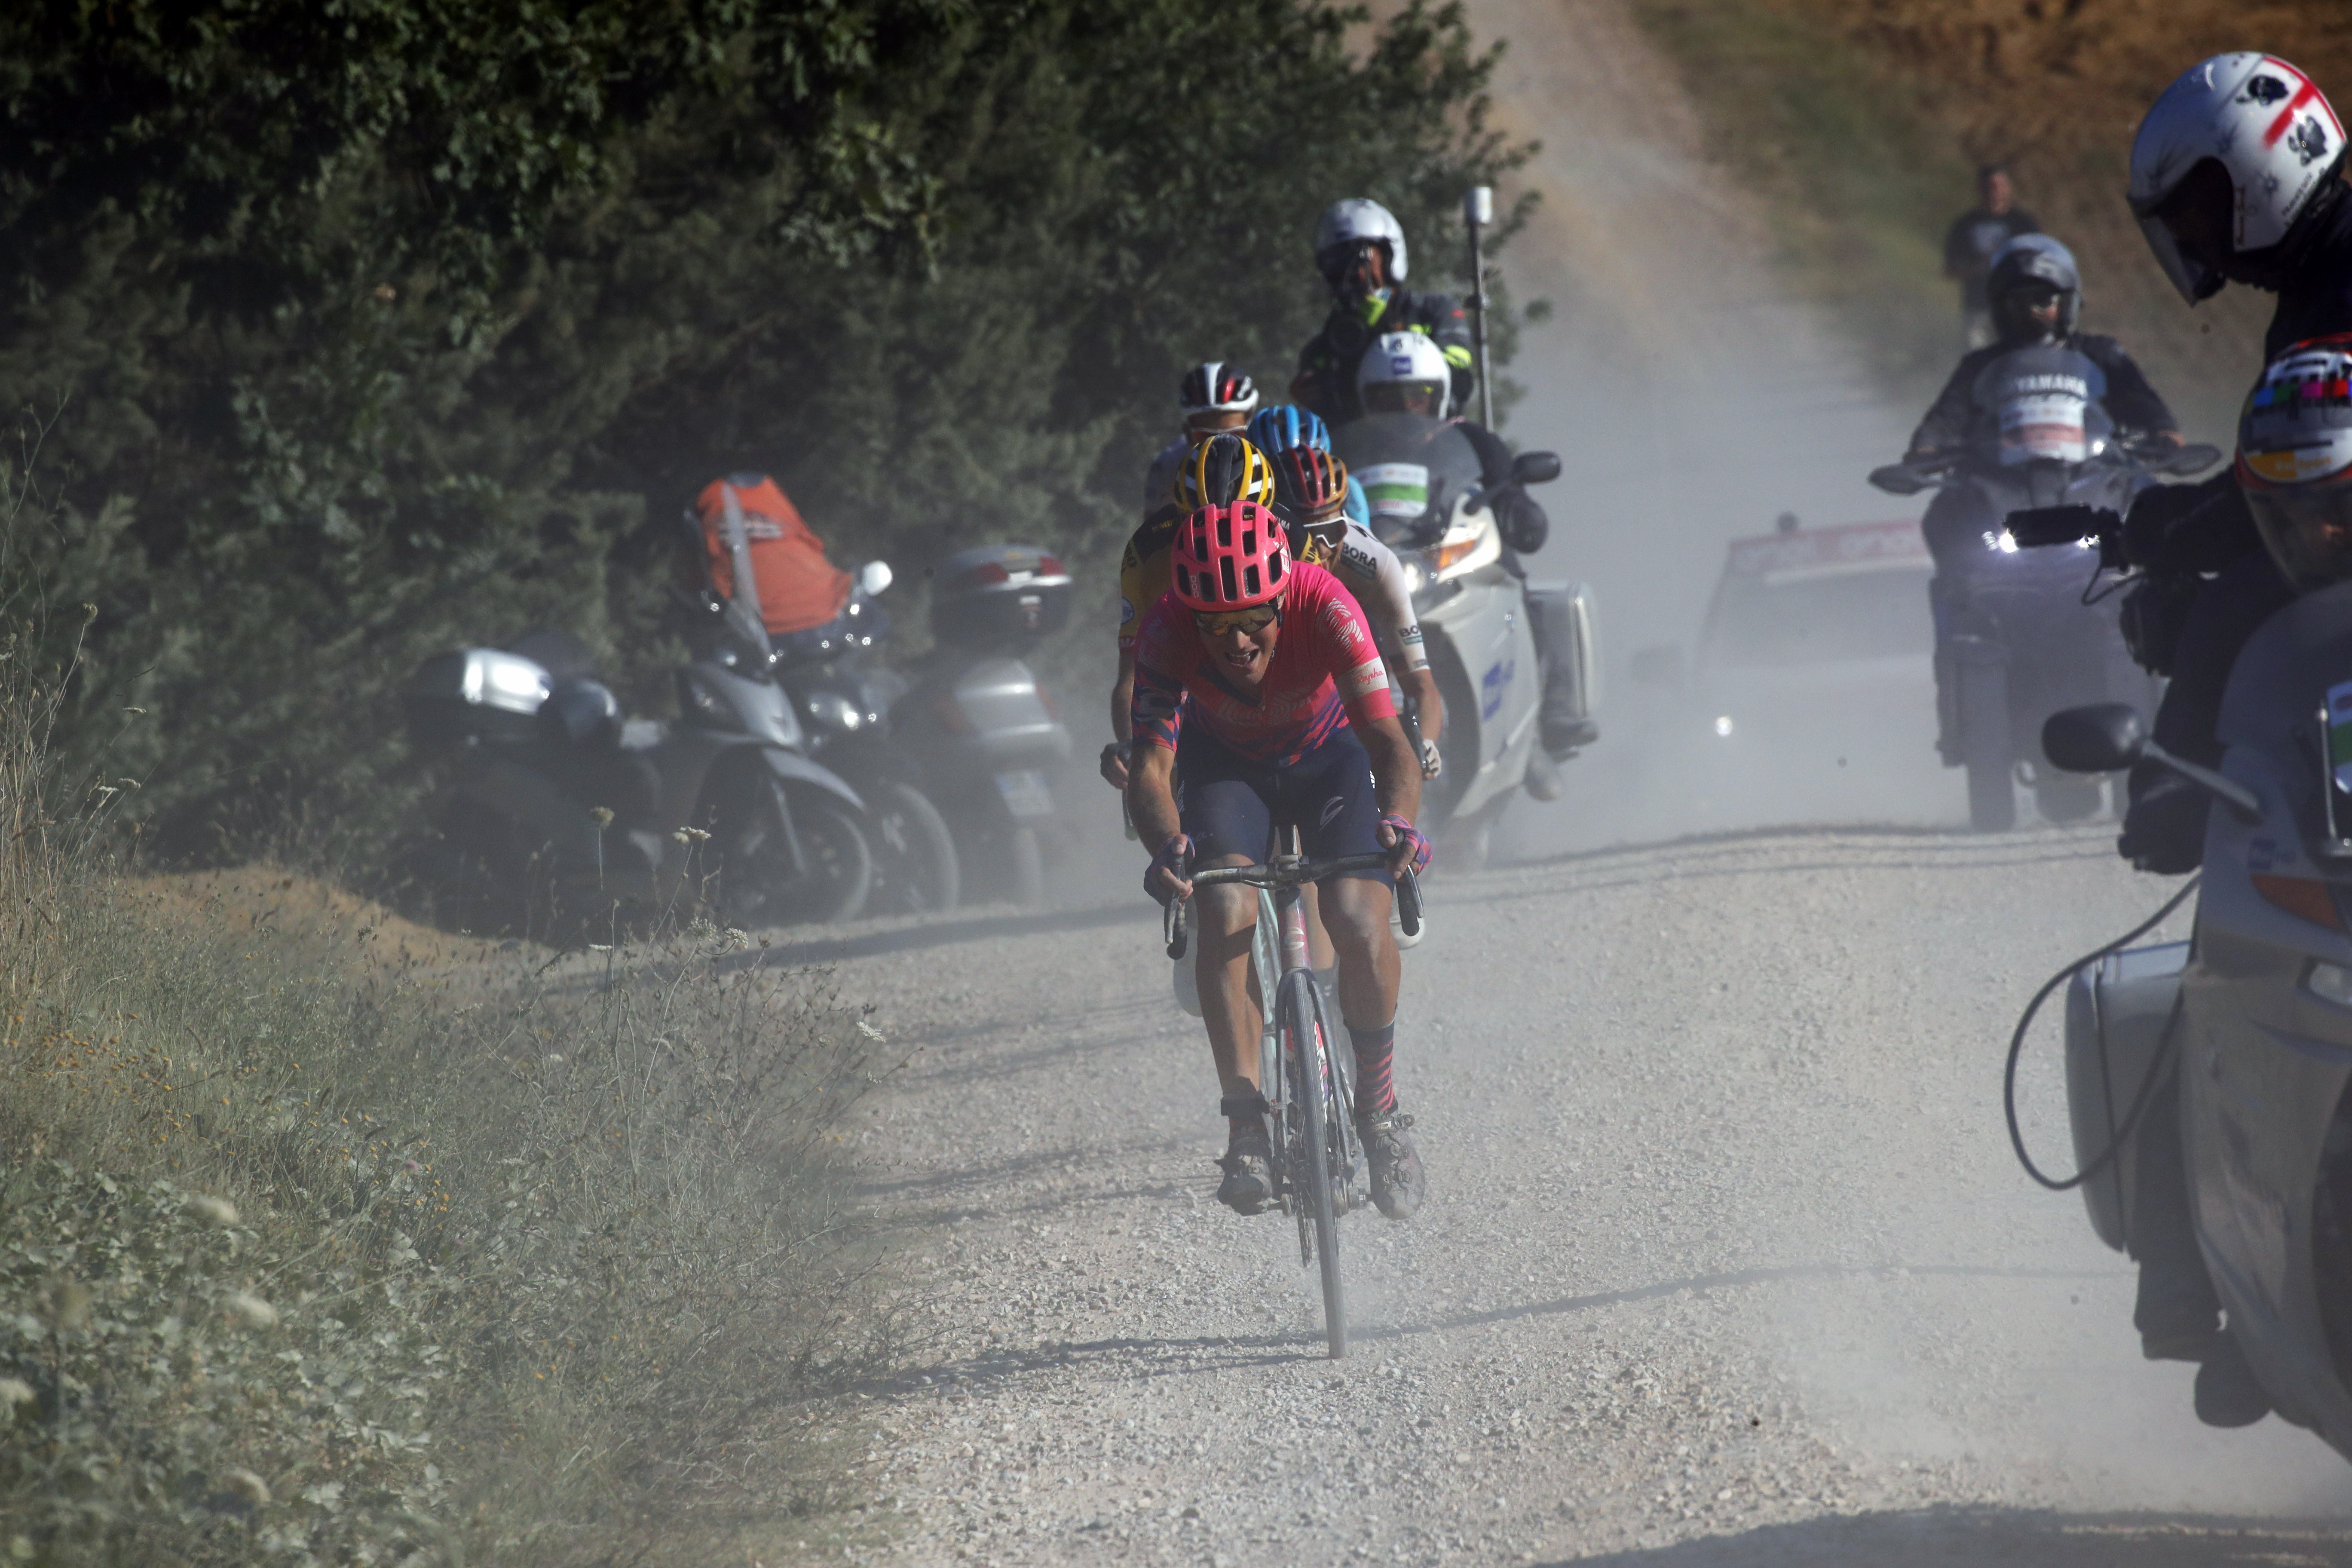 An exciting new feature at the 2022 Gran Fondo Strade Bianche